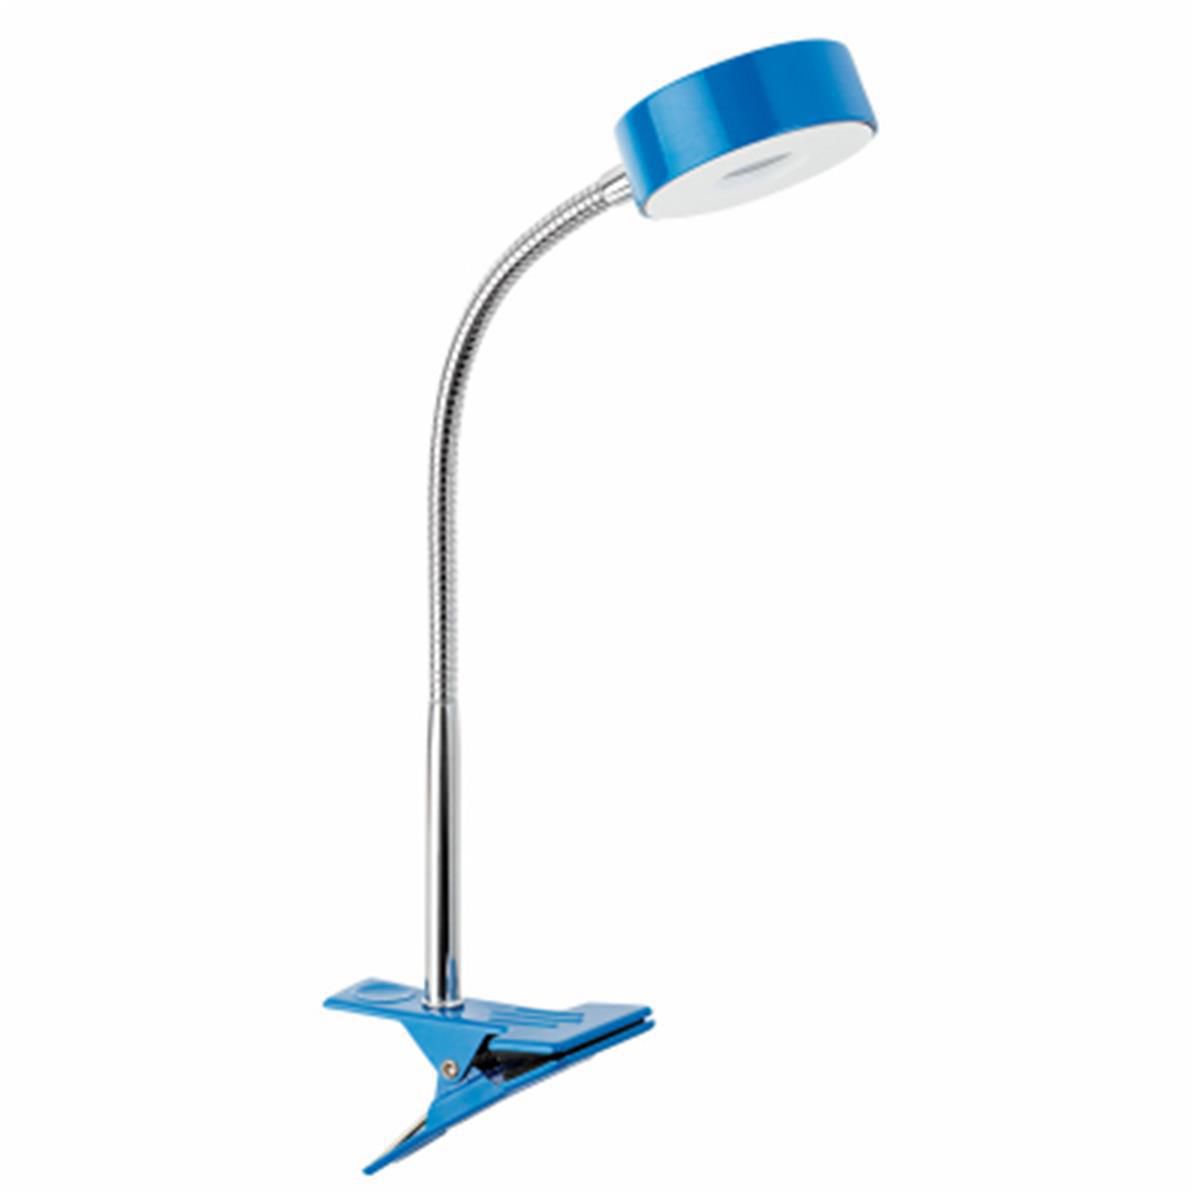 Image for Disston 209983 LED Clip Lamp, Blue at Kohl's.